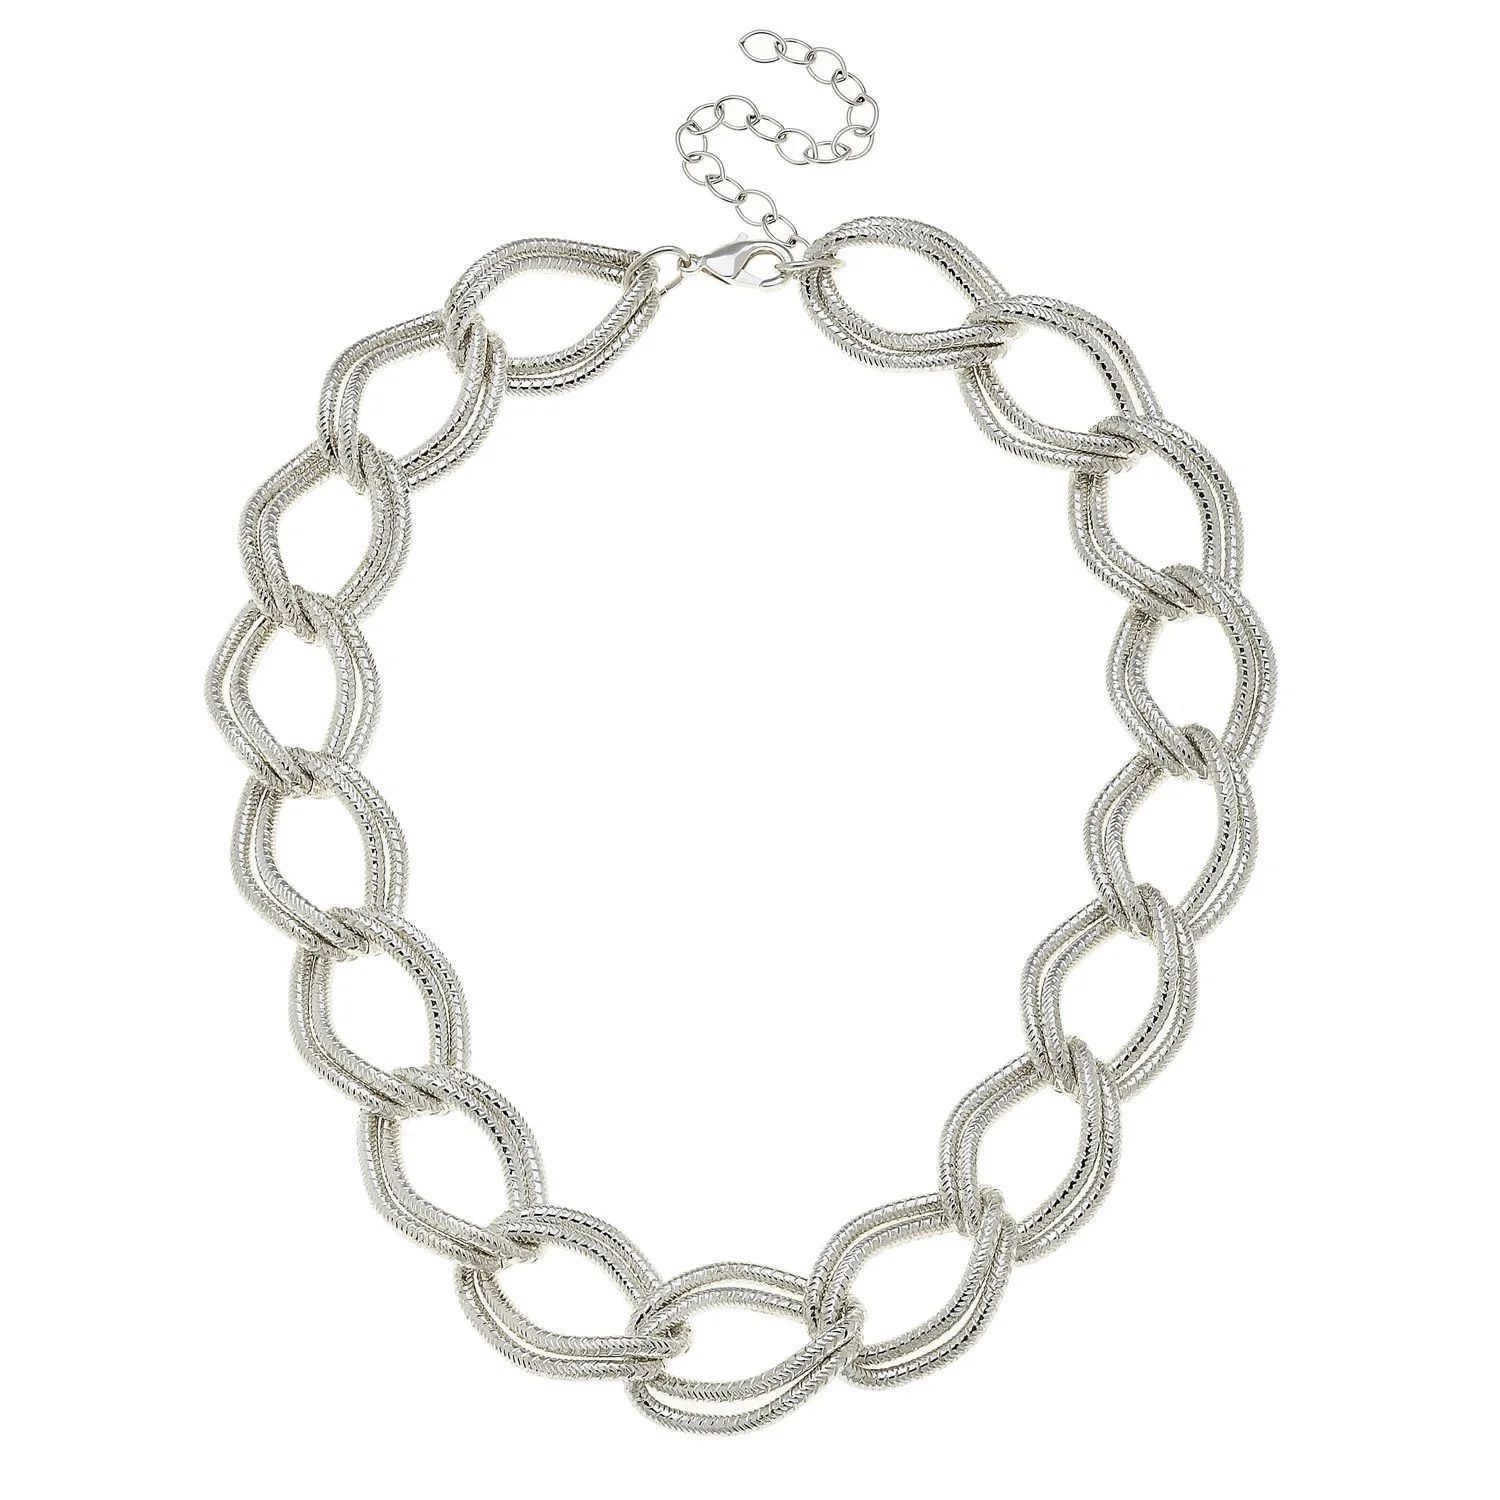 Double Loop Chain Necklace | Susan Shaw